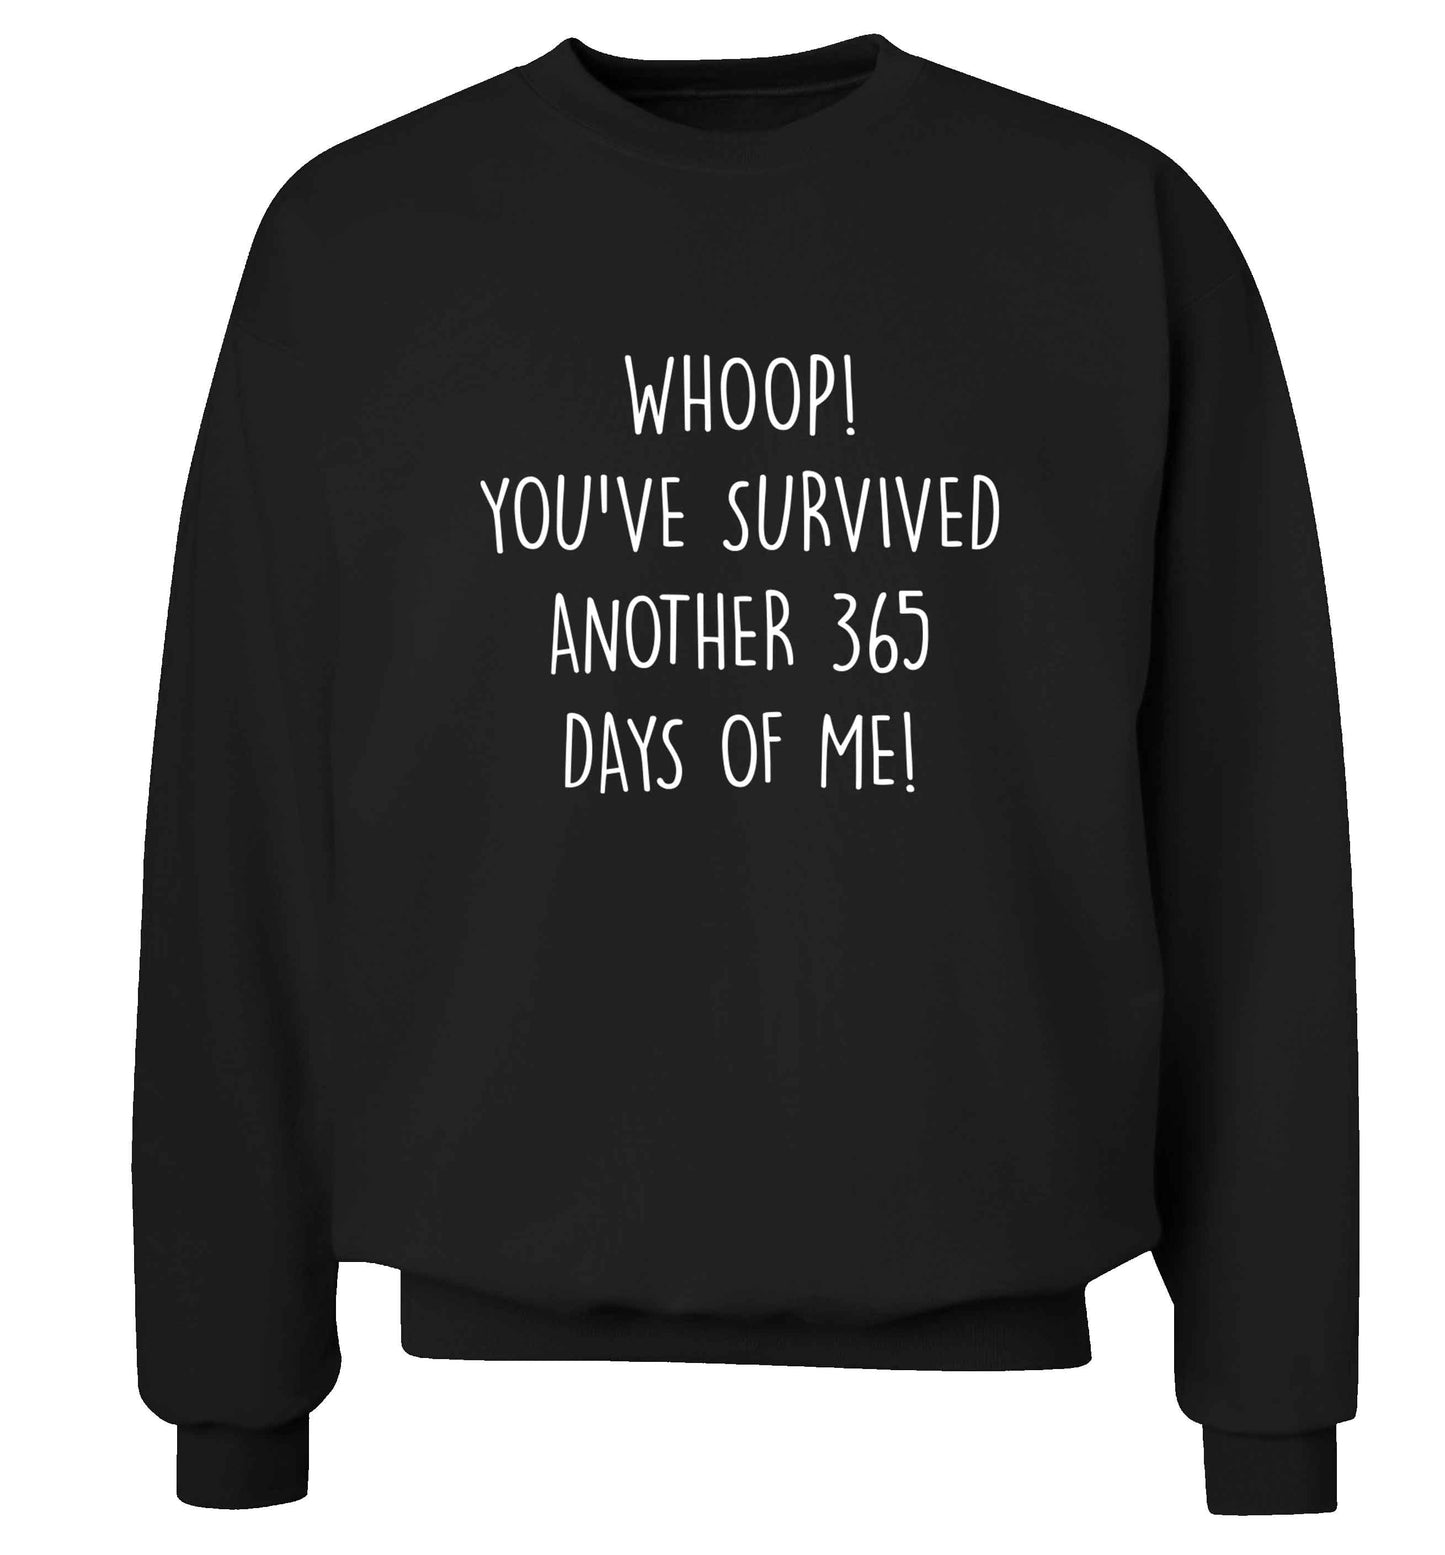 Whoop! You've survived another 365 days with me! adult's unisex black sweater 2XL